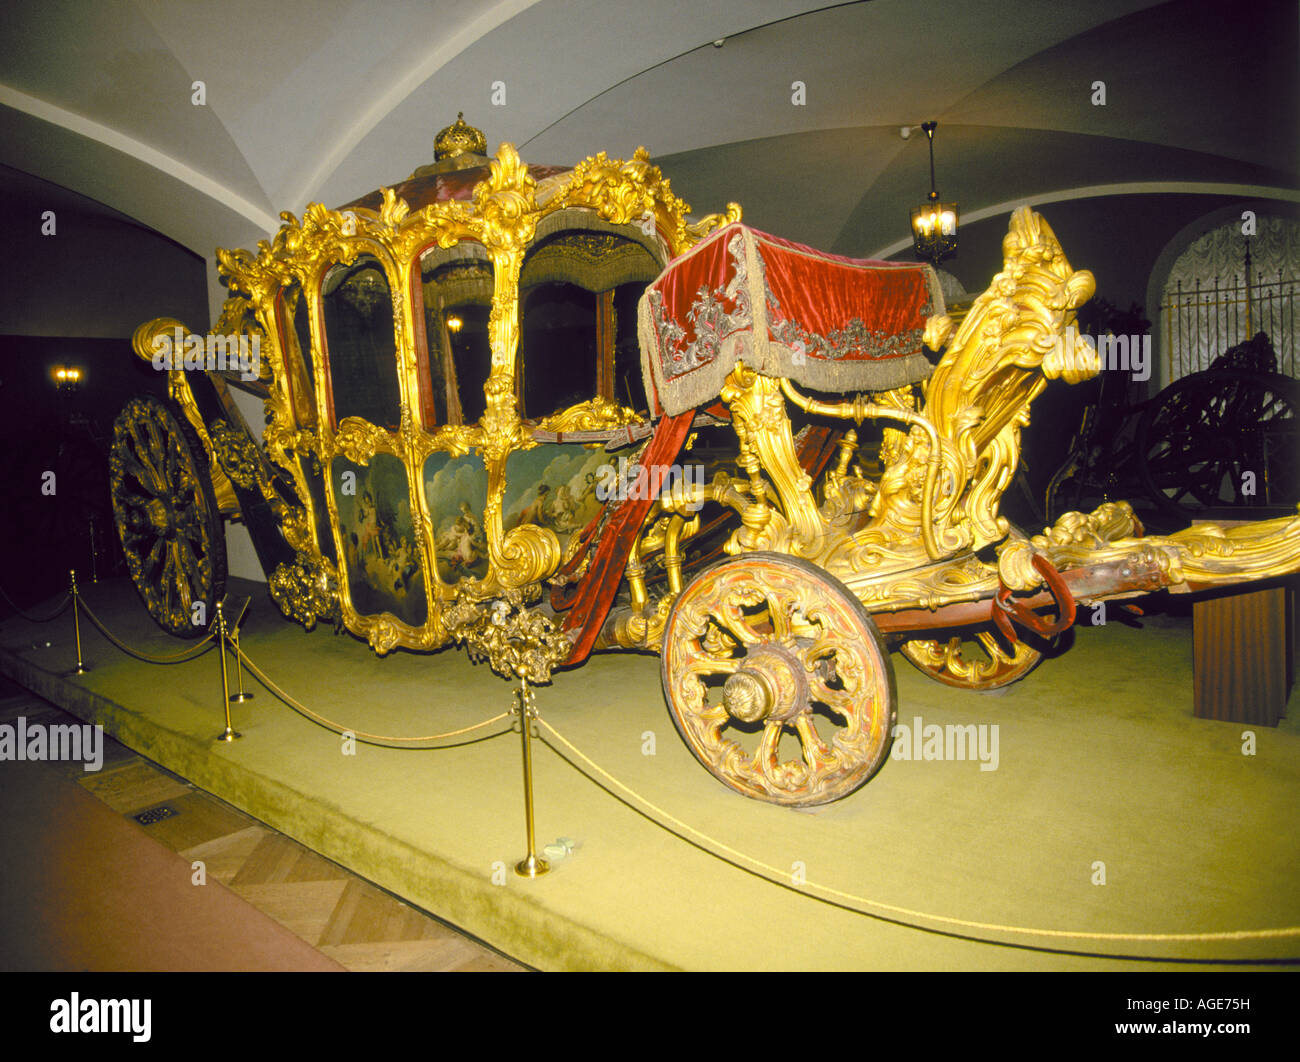 A golden carriage from the time of the Czars in the Armory Museum on the grounds of the Kremlin in Moscow Stock Photo